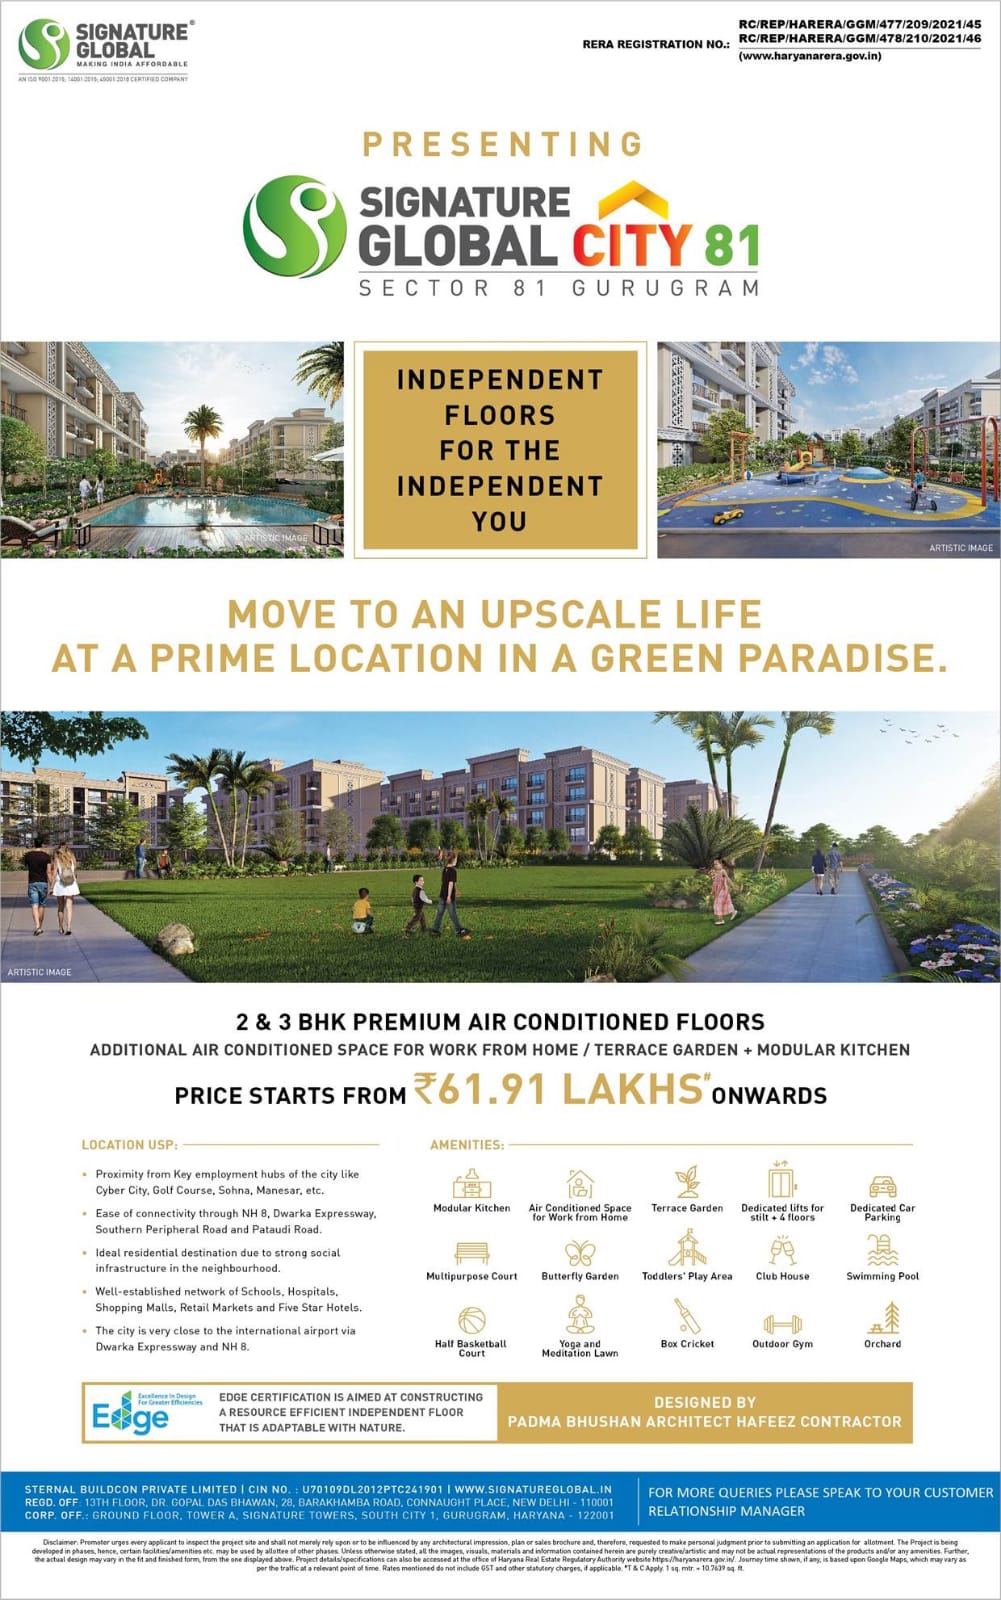 Book 2 & 3 BHK premium air conditioned floors prices Starting Rs 61.91 Lac at Signature Global City 81, Gurgaon